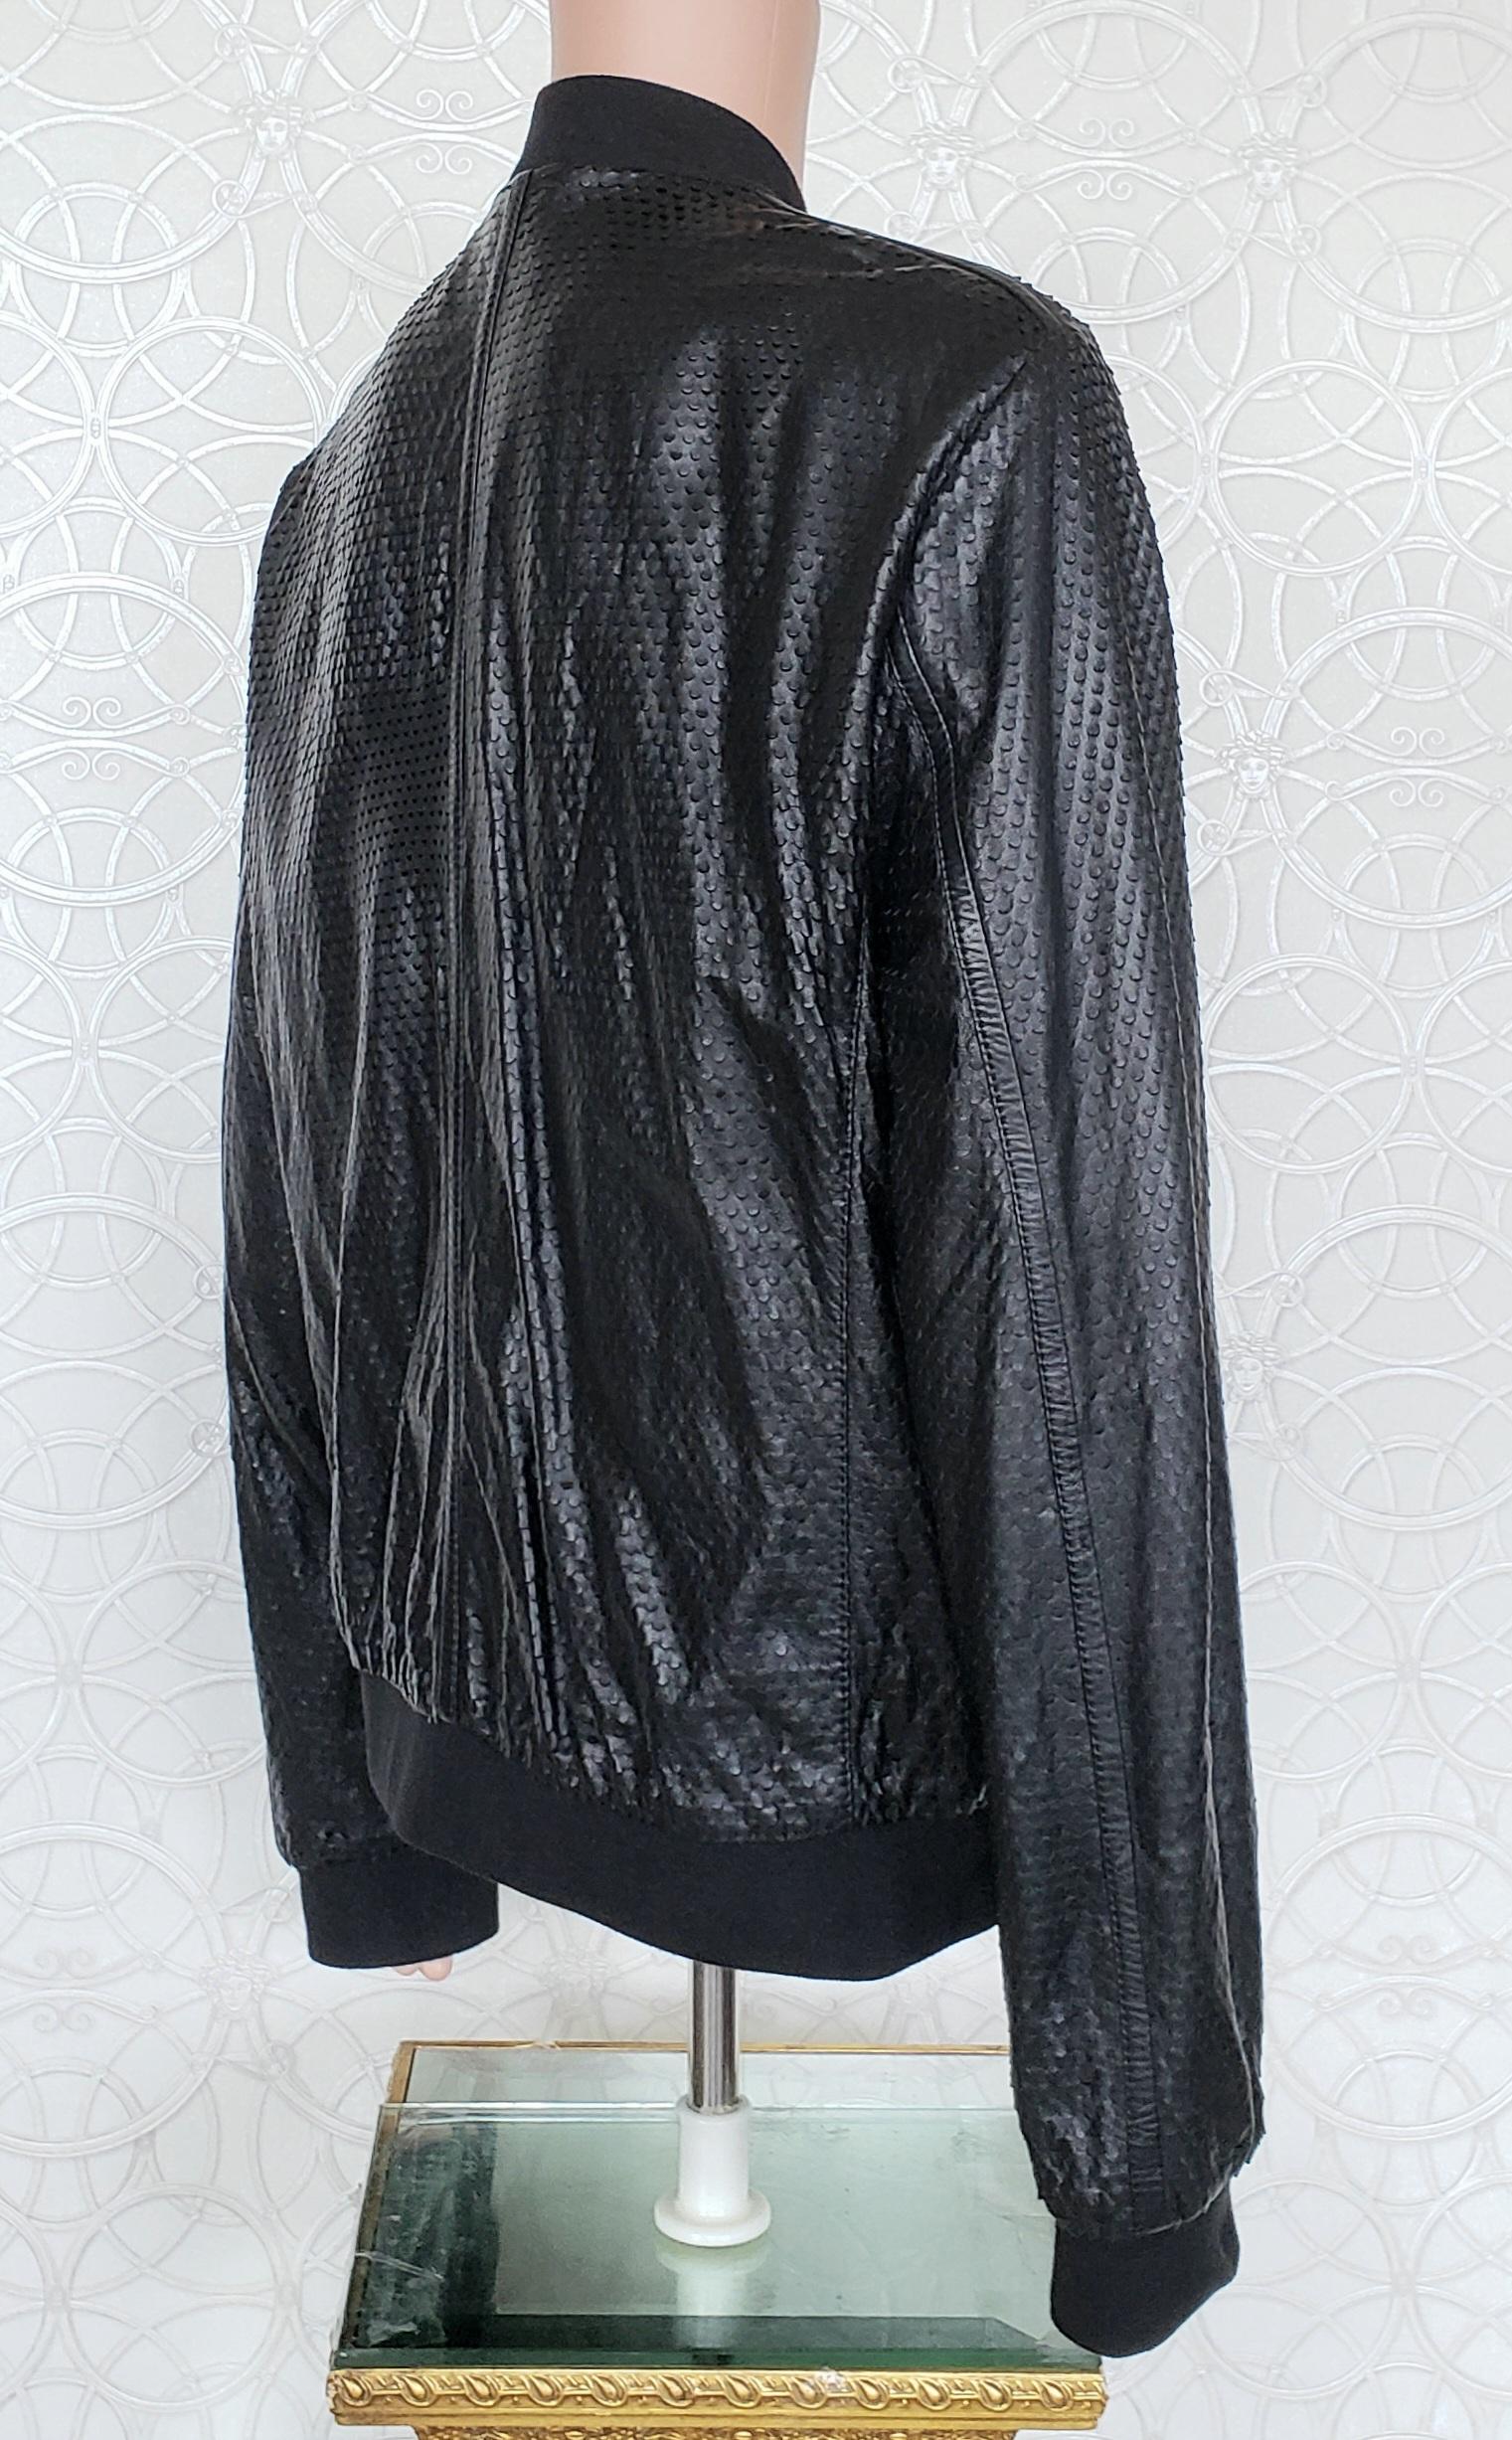 Black New VERSACE COLLECTION PERFORATED LAMB LEATHER BLACK BOMBER JACKET 56 - 3XL For Sale